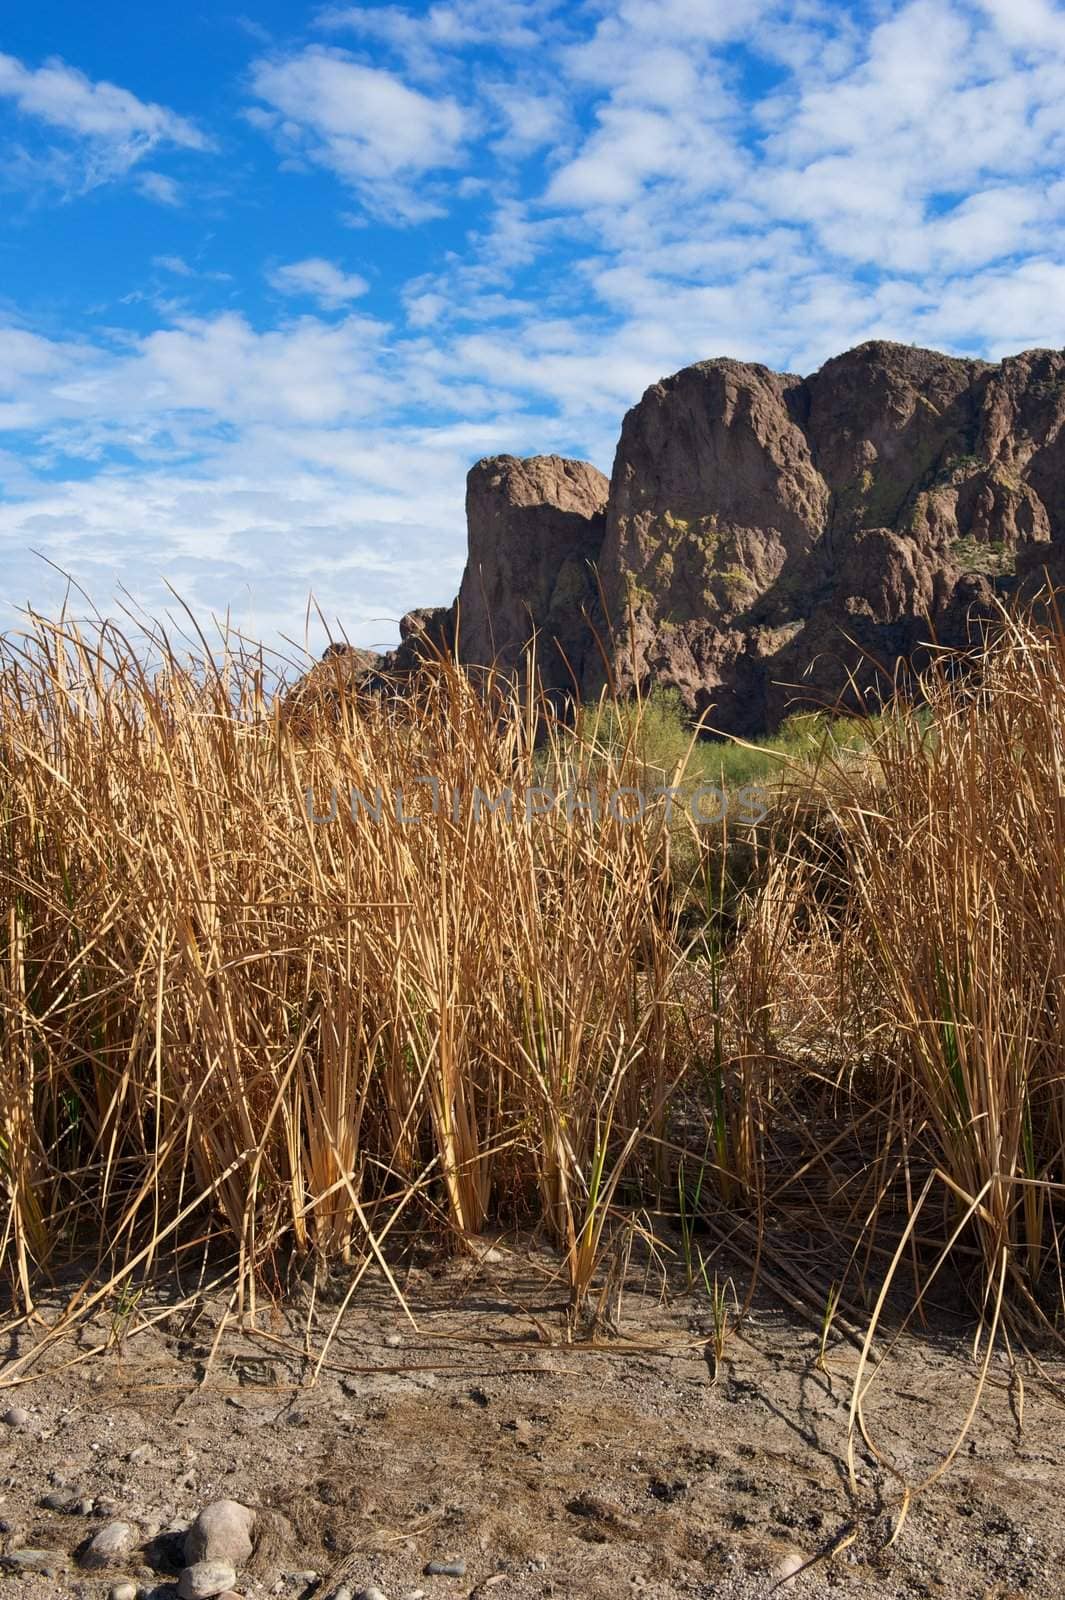 Tall, dry grass in front of green plants and desert mountains with blue sky and white clouds